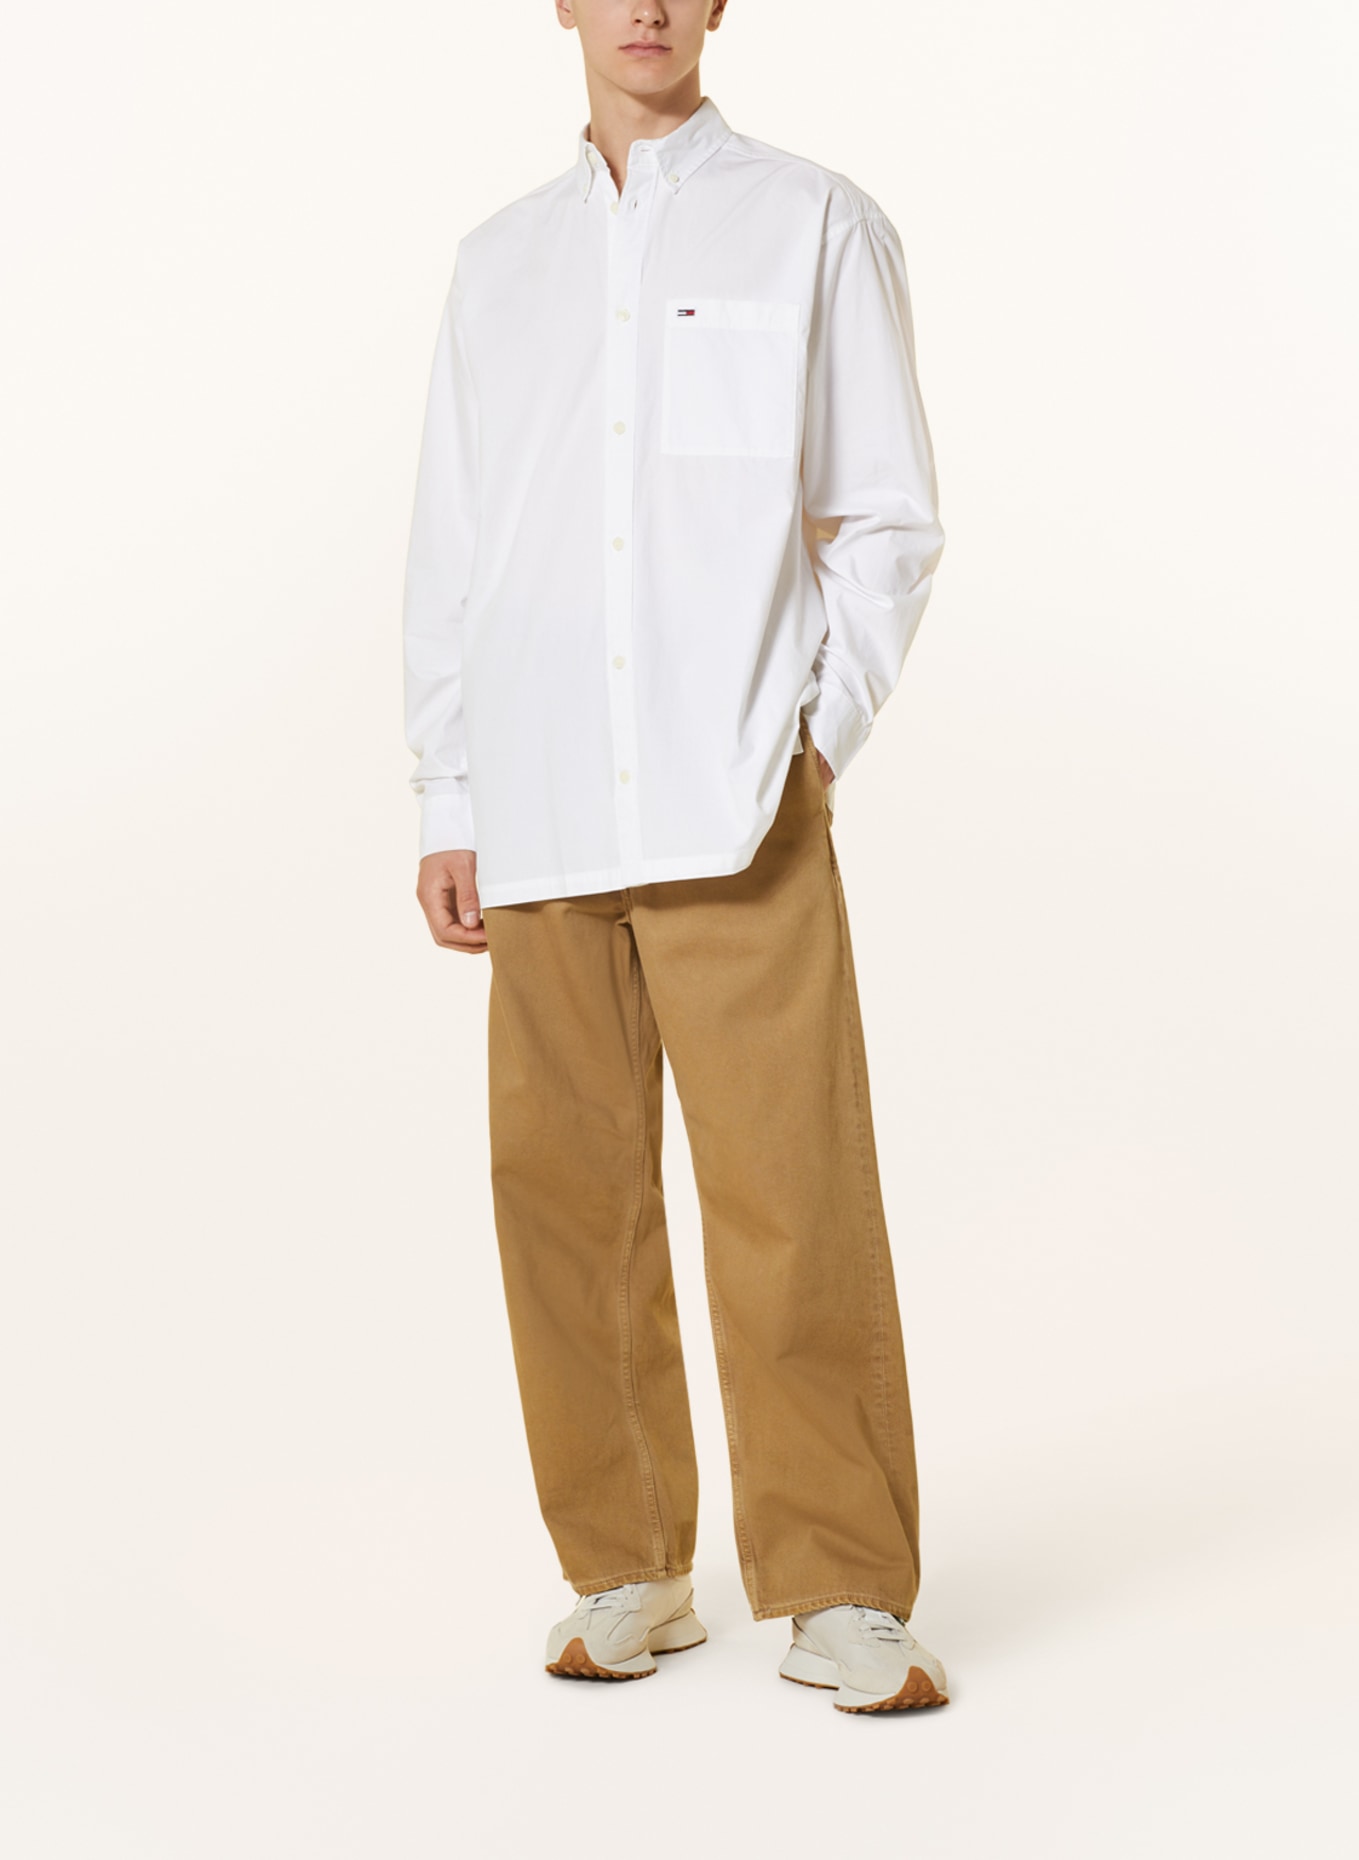 TOMMY JEANS Hemd Oversized Fit, Farbe: WEISS (Bild 2)